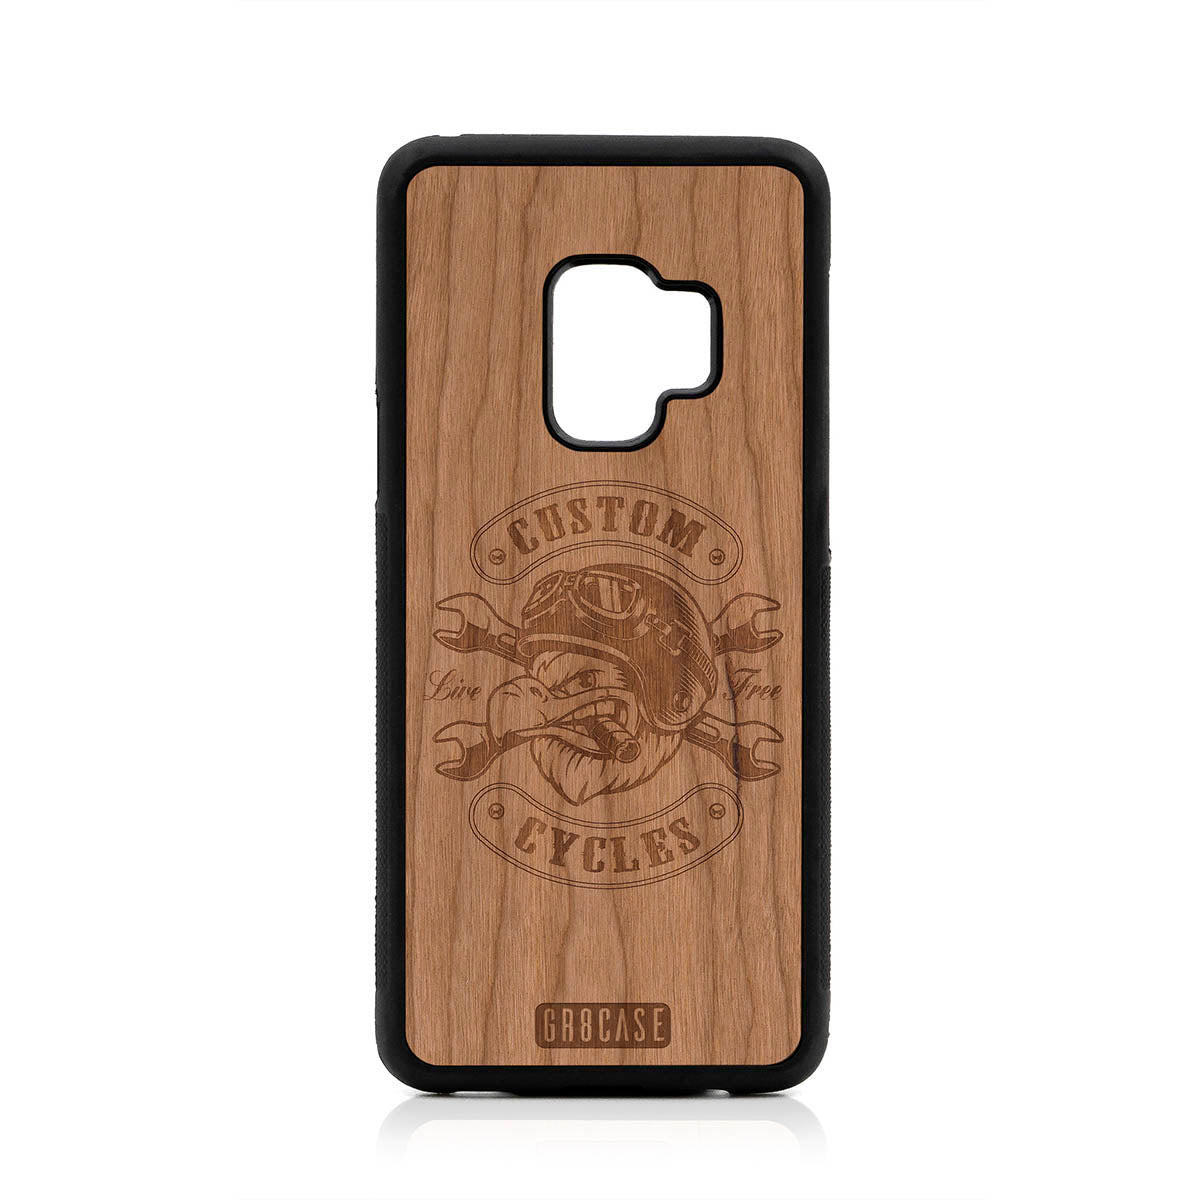 Custom Cycles Live Free (Biker Eagle) Design Wood Case For Samsung Galaxy S9 by GR8CASE